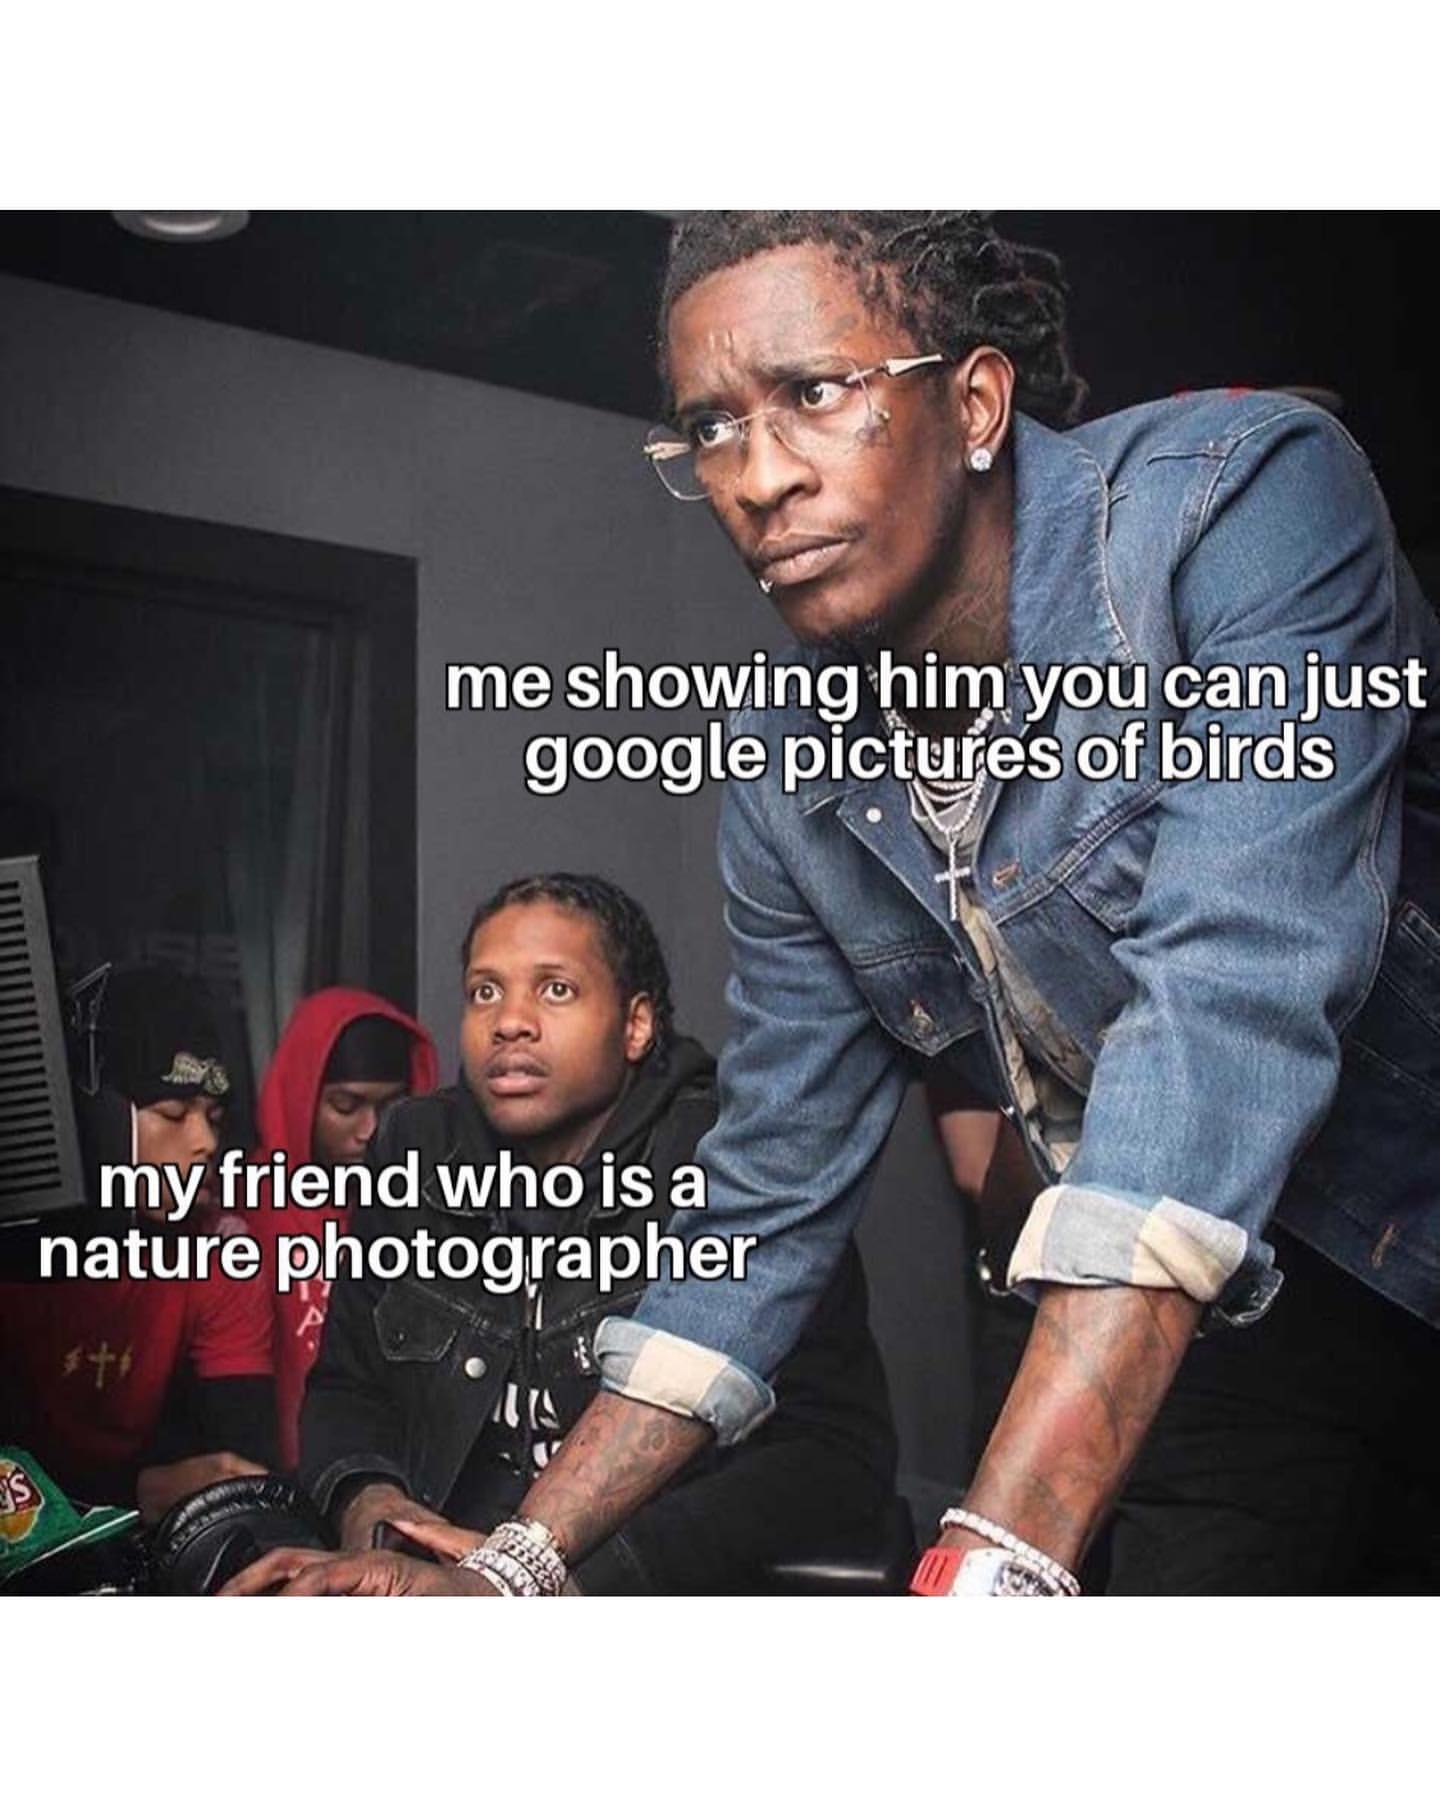 Me showing him you can just google pictures of birds. My friend who is a nature photographer.